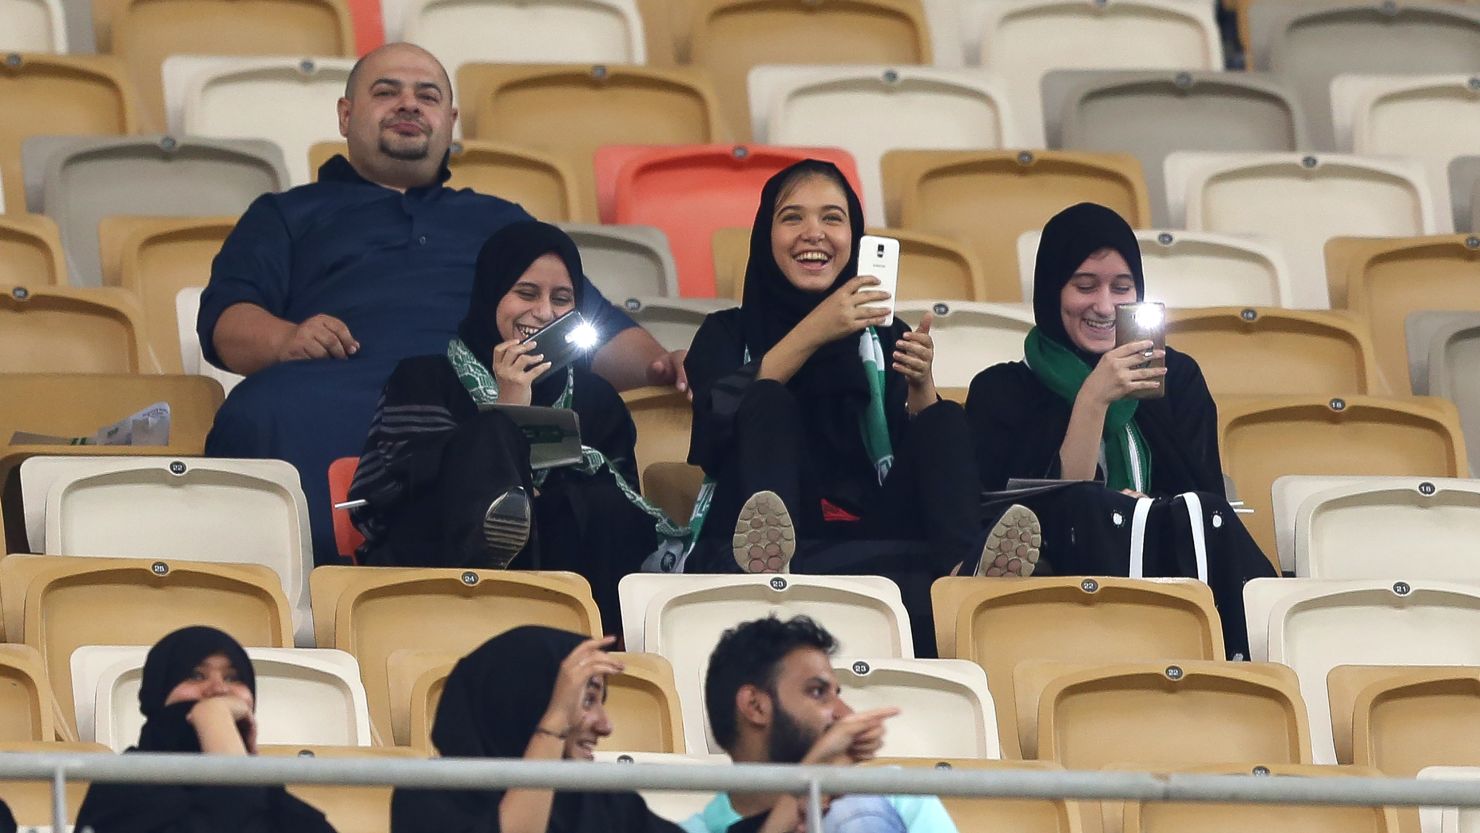 Female Saudi supporters of Al-Ahli attend their teams football match against Al-Batin in the Saudi Pro League at the King Abdullah Sports City in Jeddah on January 12, 2018.
Saudi Arabia will allow women to enter a football stadium for the first time to watch a match, as the ultra-conservative kingdom eases strict decades-old rules separating the sexes. / AFP PHOTO / STRINGER        (Photo credit should read STRINGER/AFP/Getty Images)